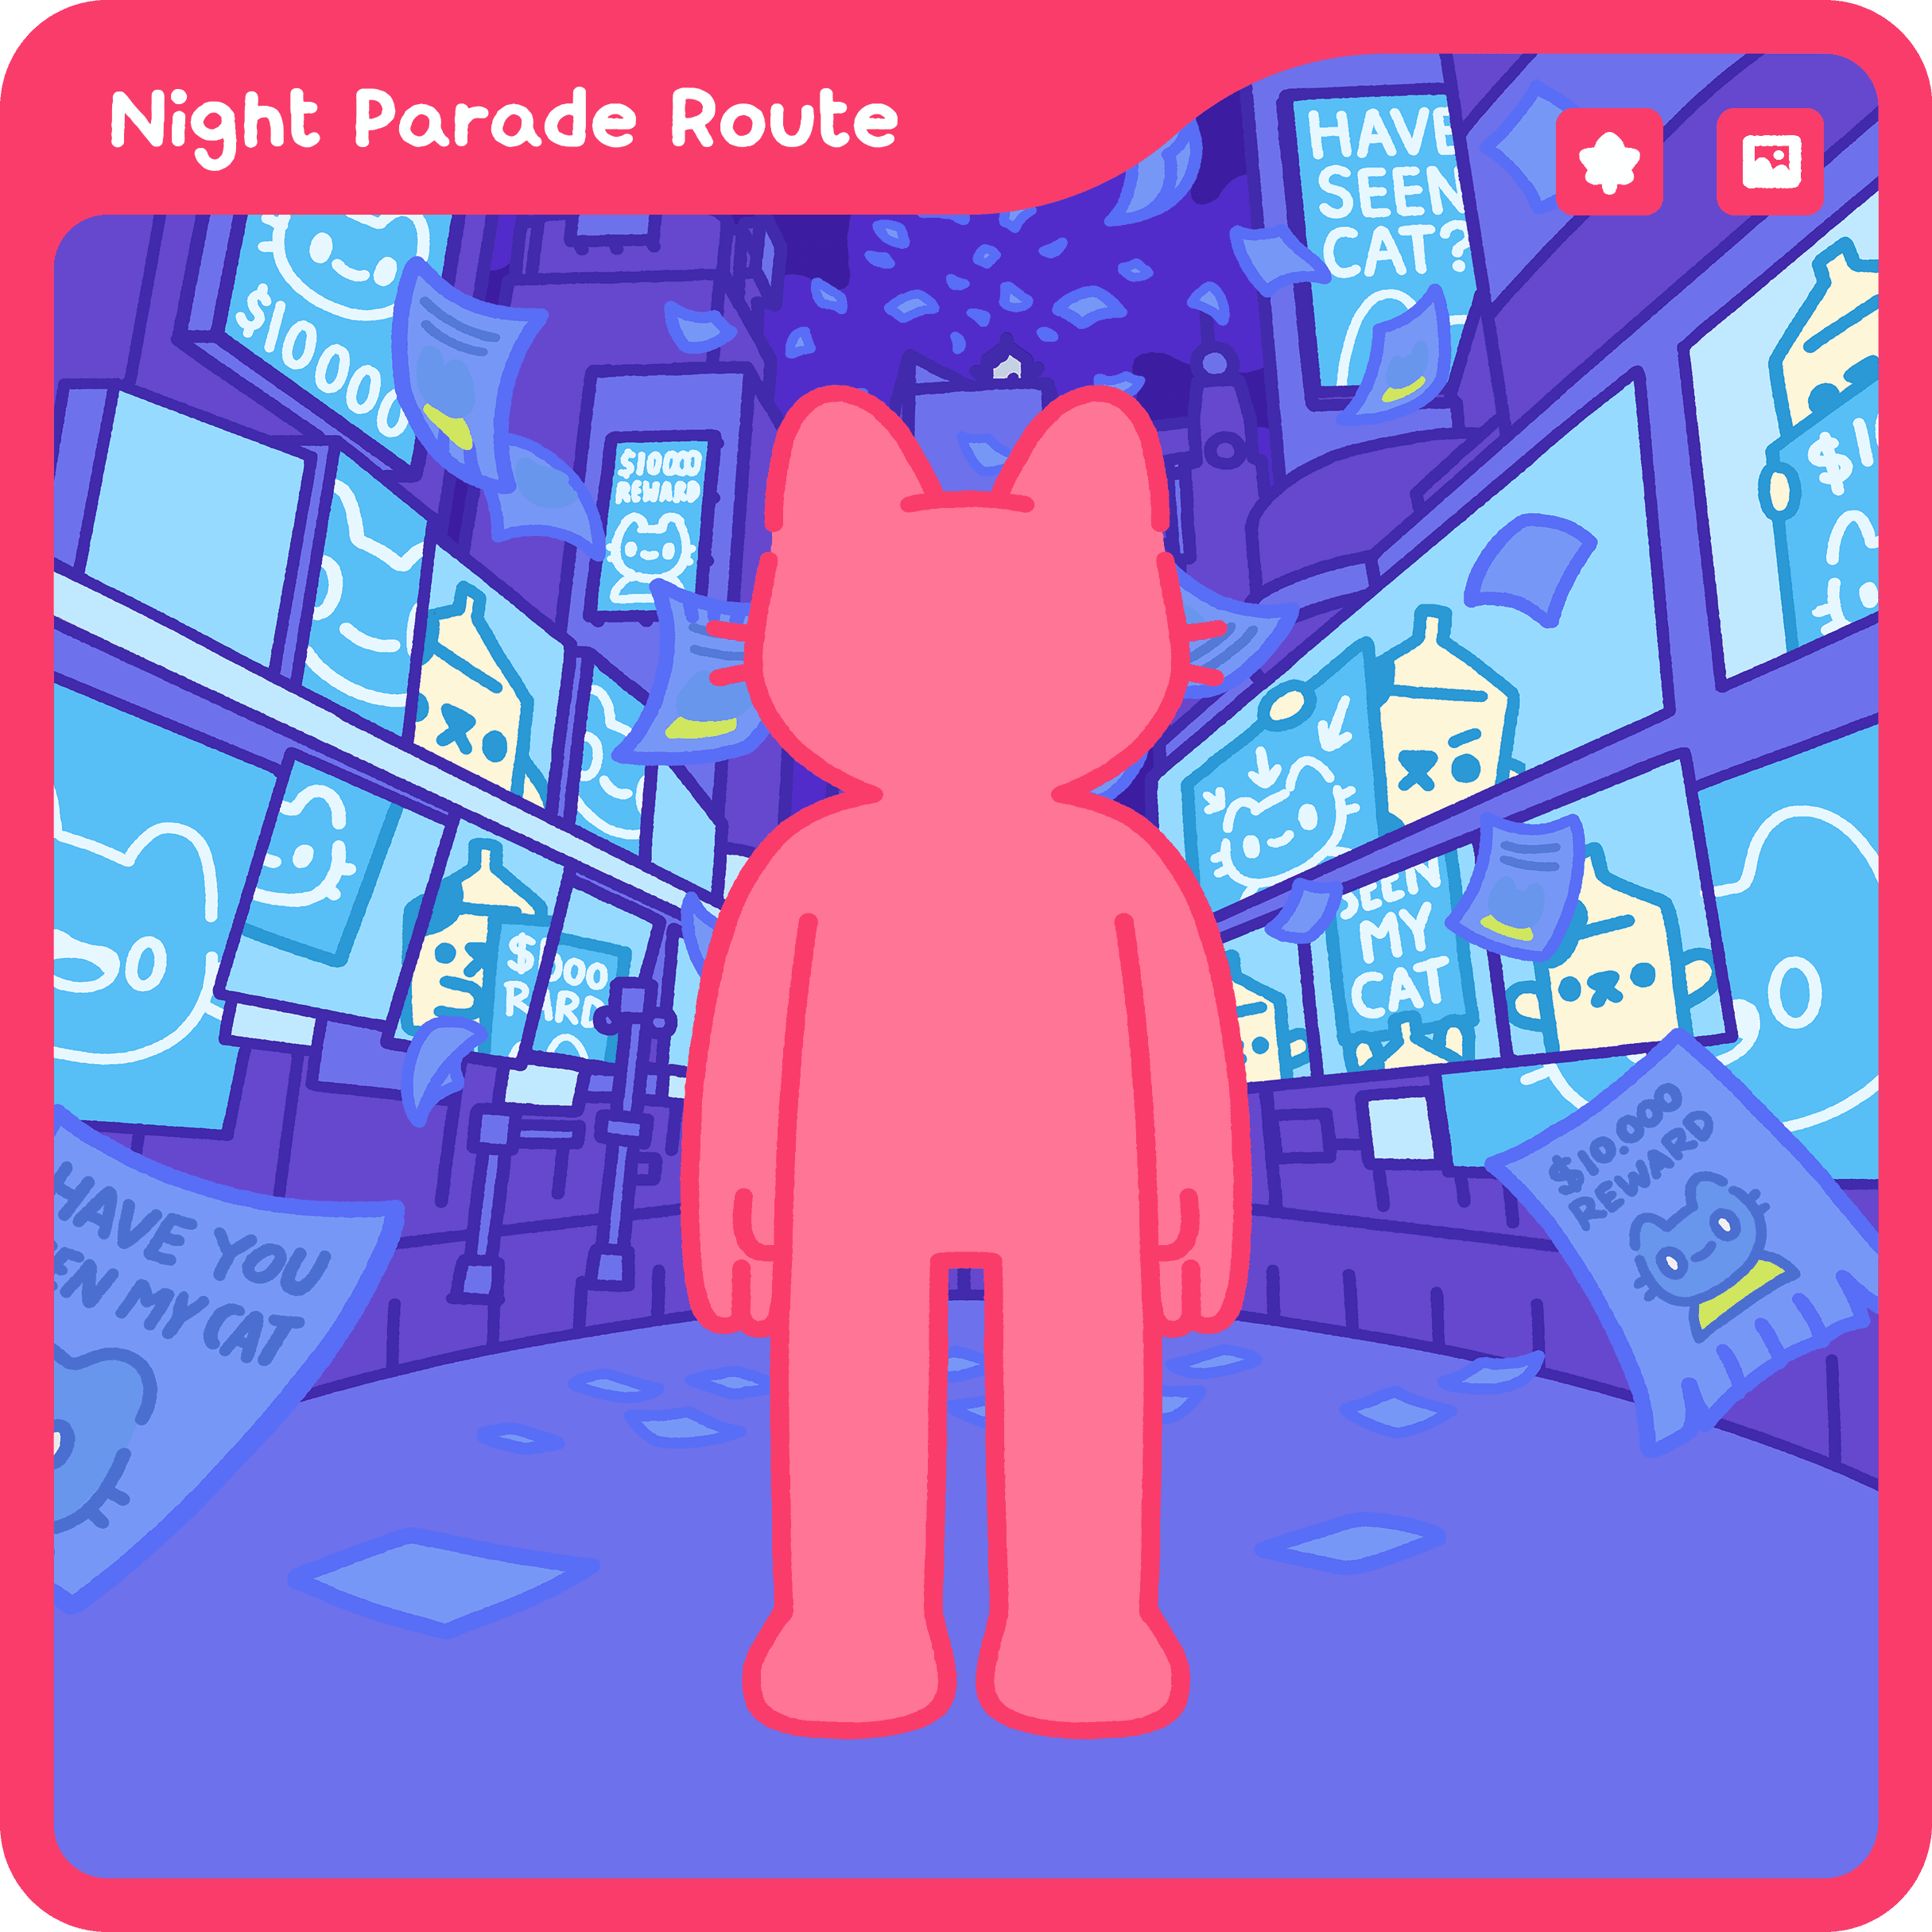 Night Parade Route